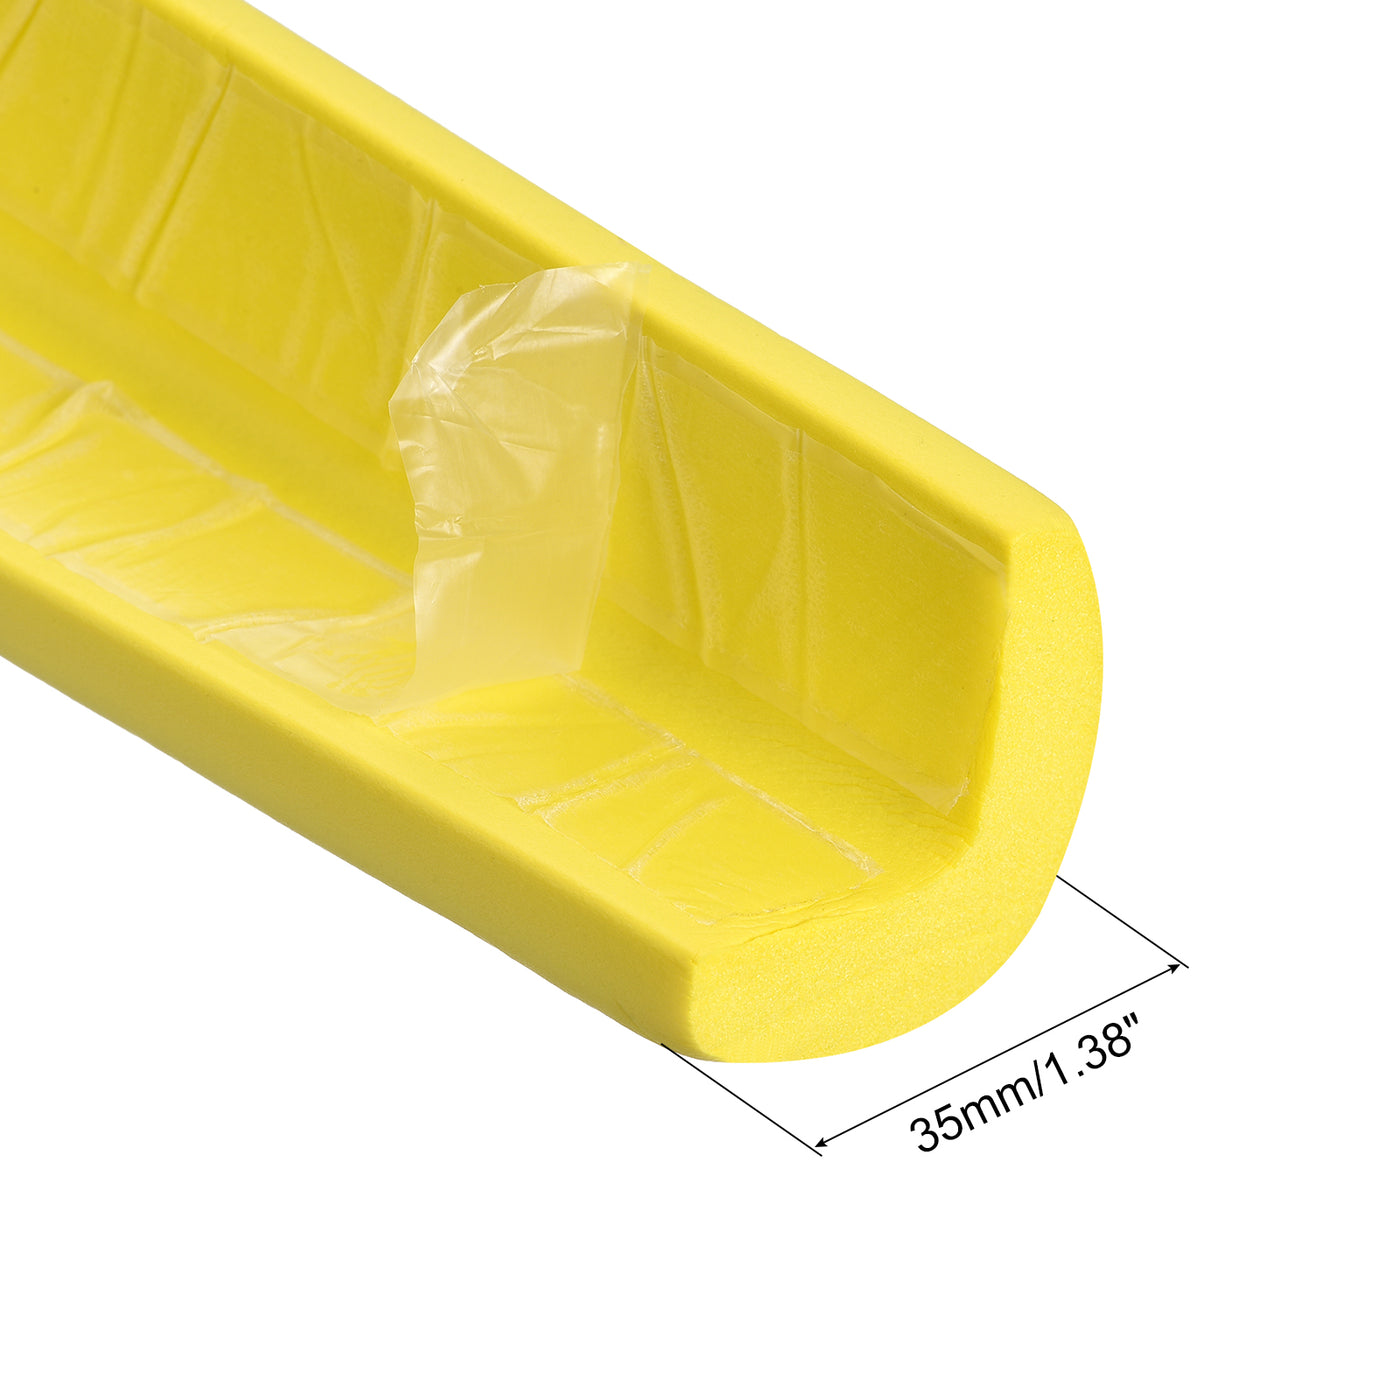 uxcell Uxcell Corner Guards Edge Protectors 6.56ft(2M), 4Pack Foam Safety Bumper Yellow